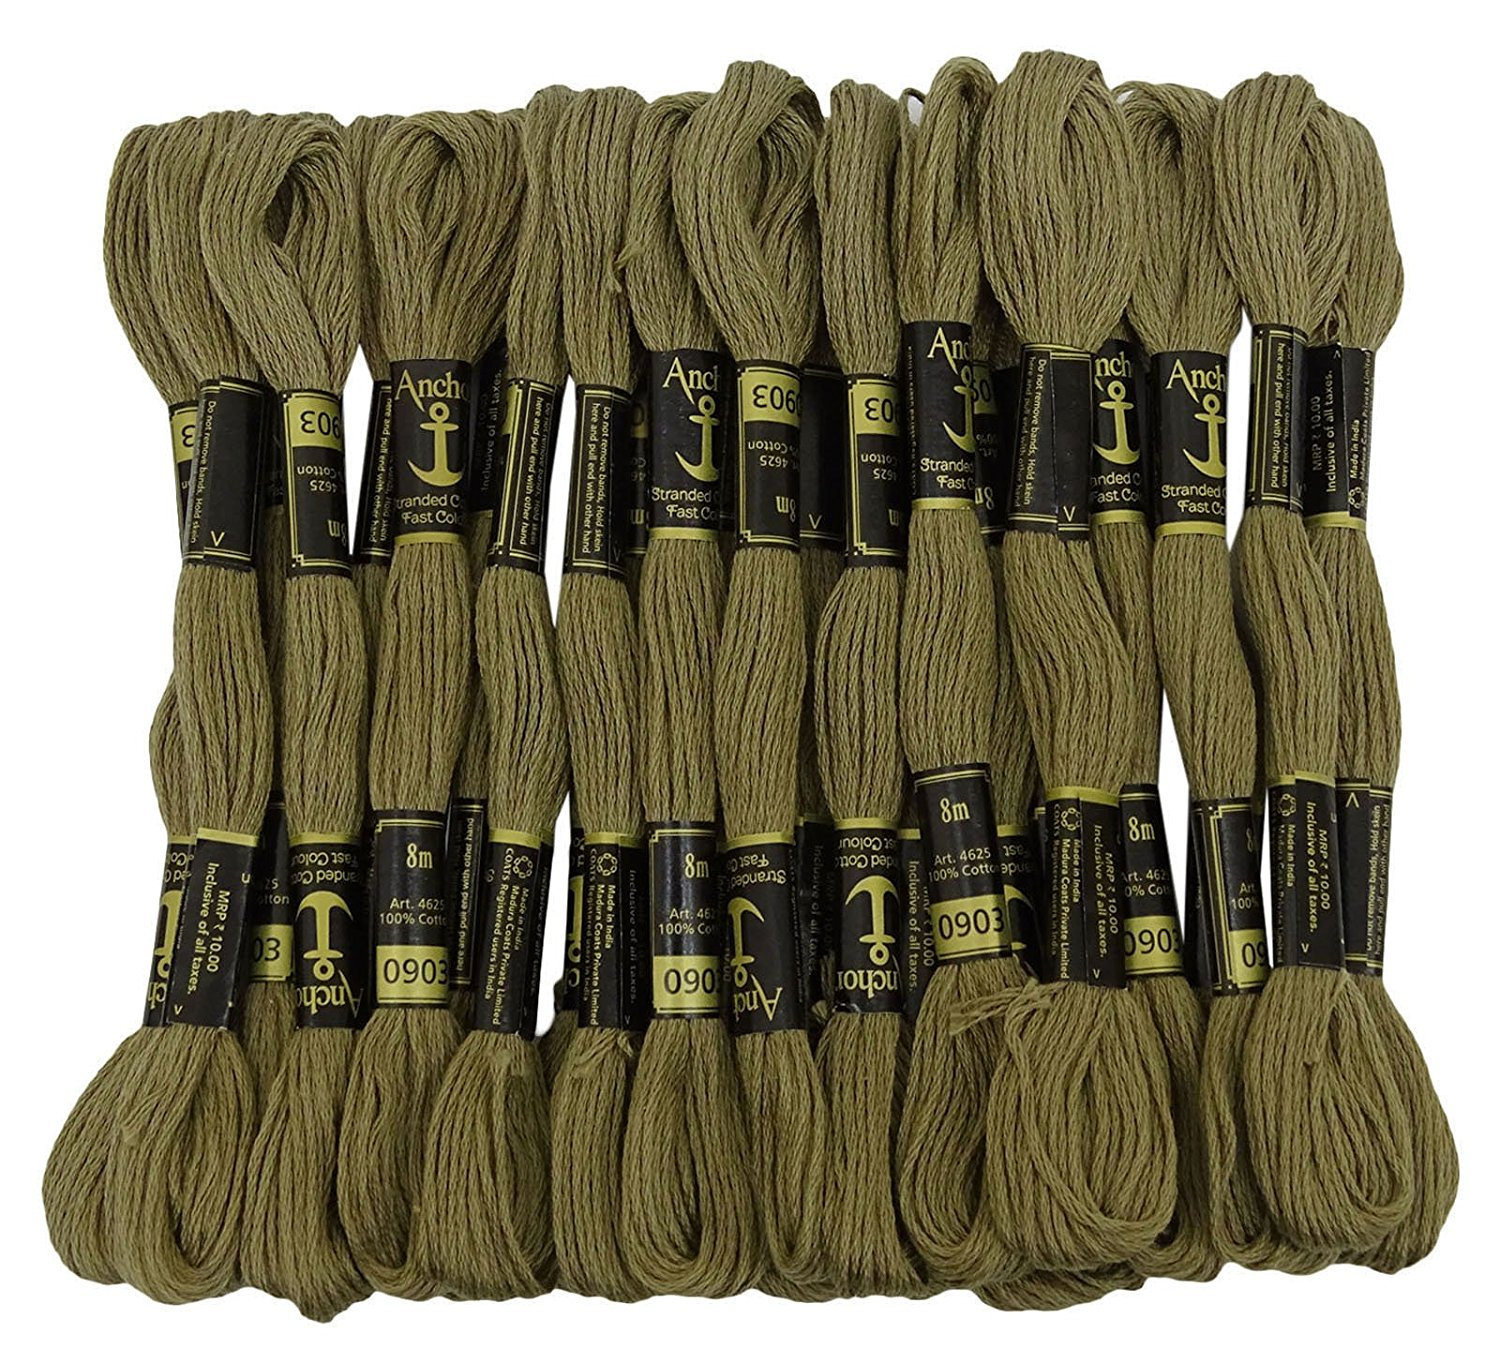 25 x Anchor Cross Stitch Hand Embroidery Floss Stranded Cotton Thread Skeins-Beige